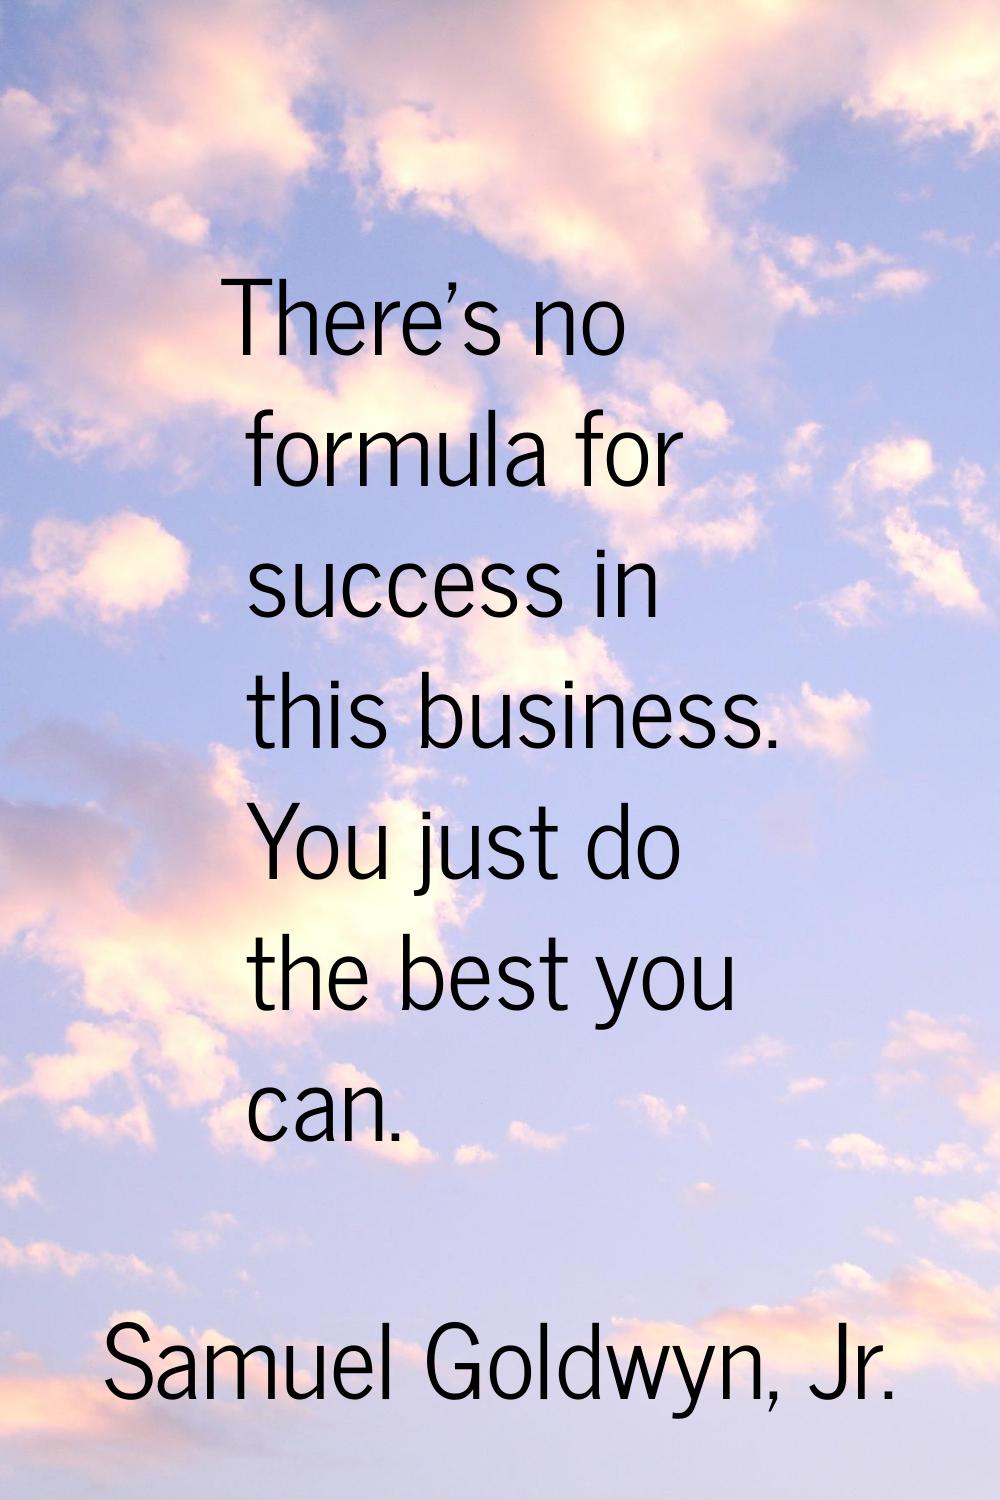 There's no formula for success in this business. You just do the best you can.